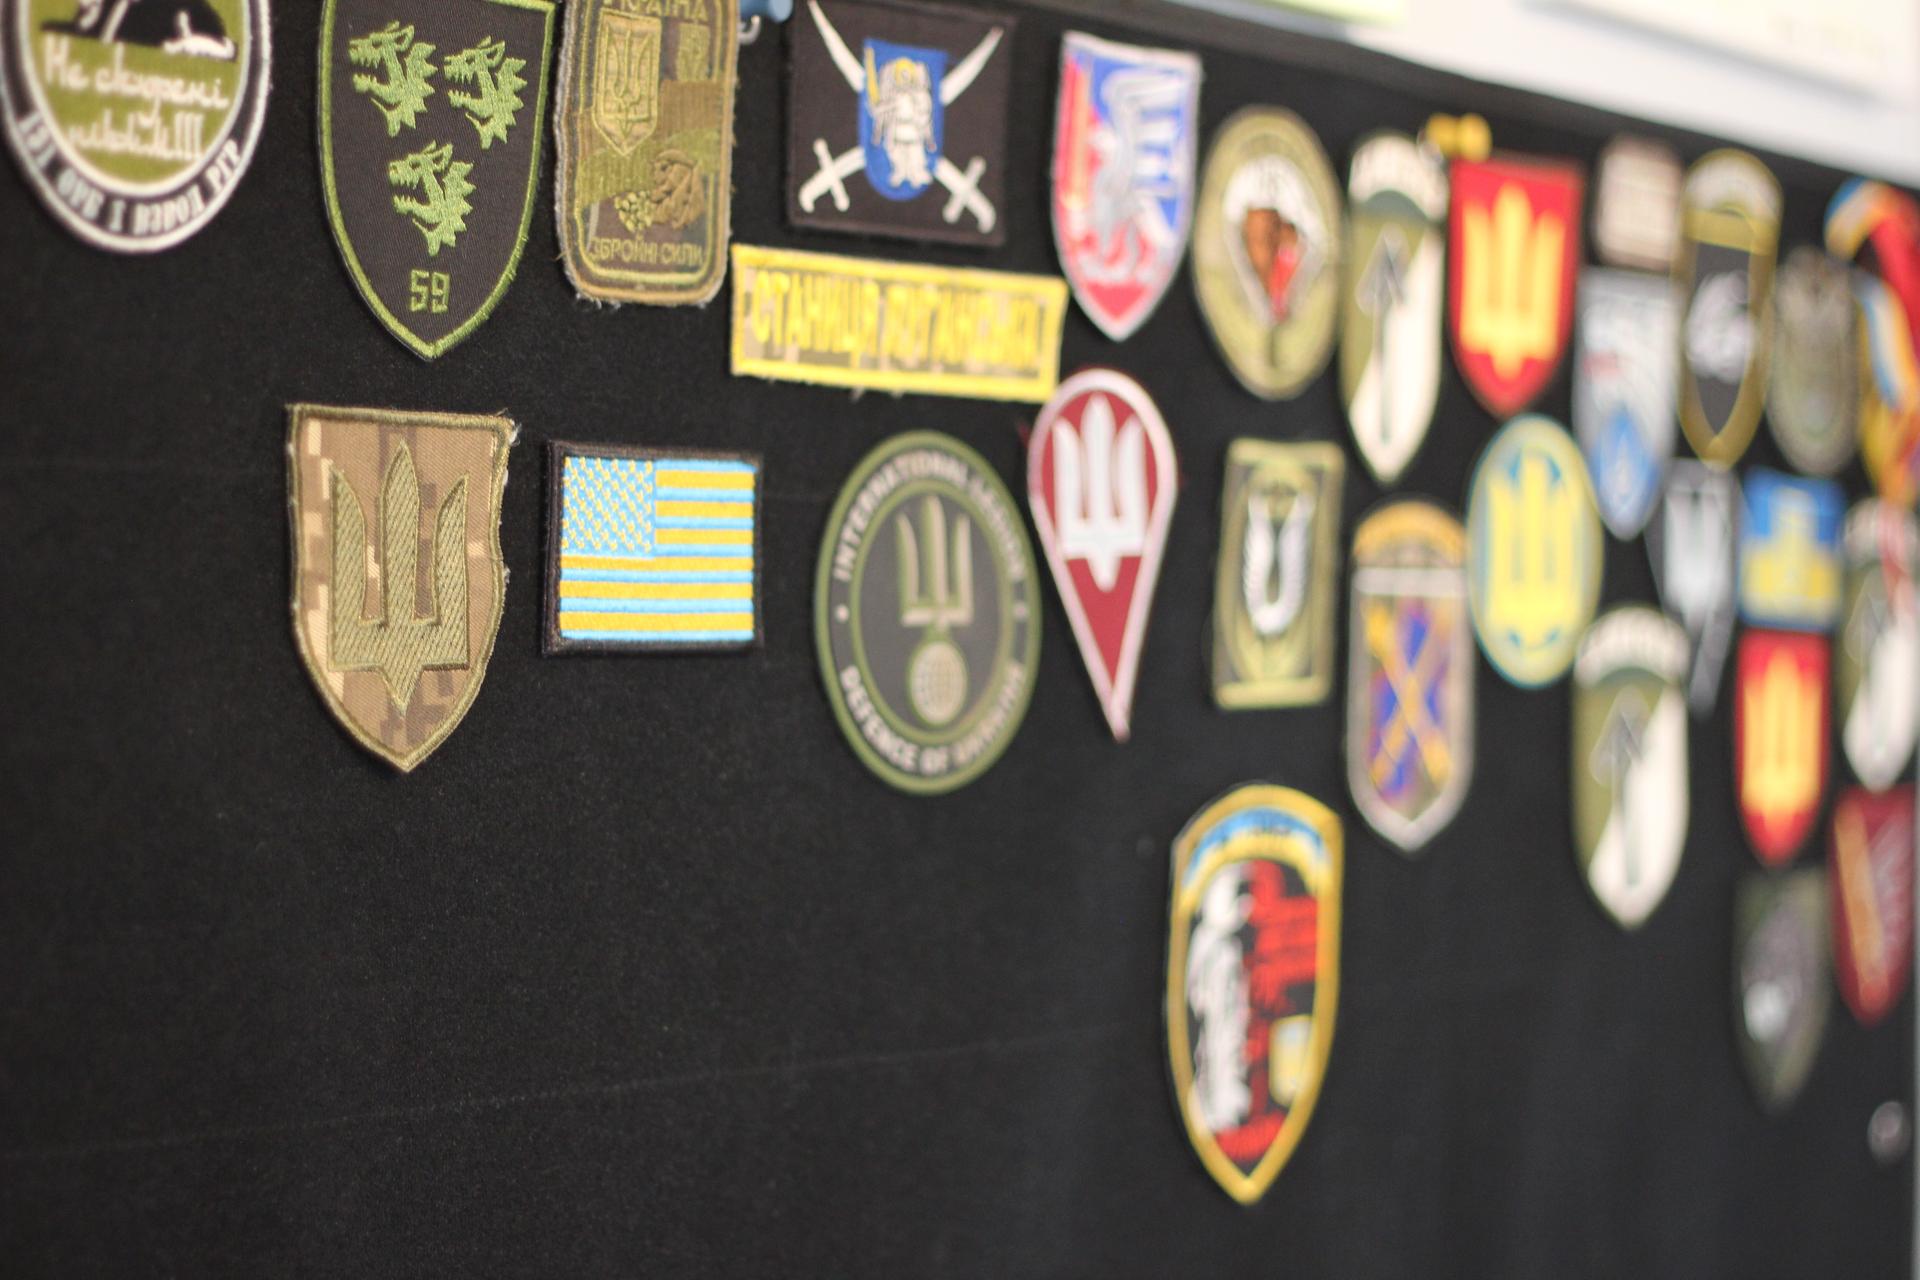 badges and medals on the wall